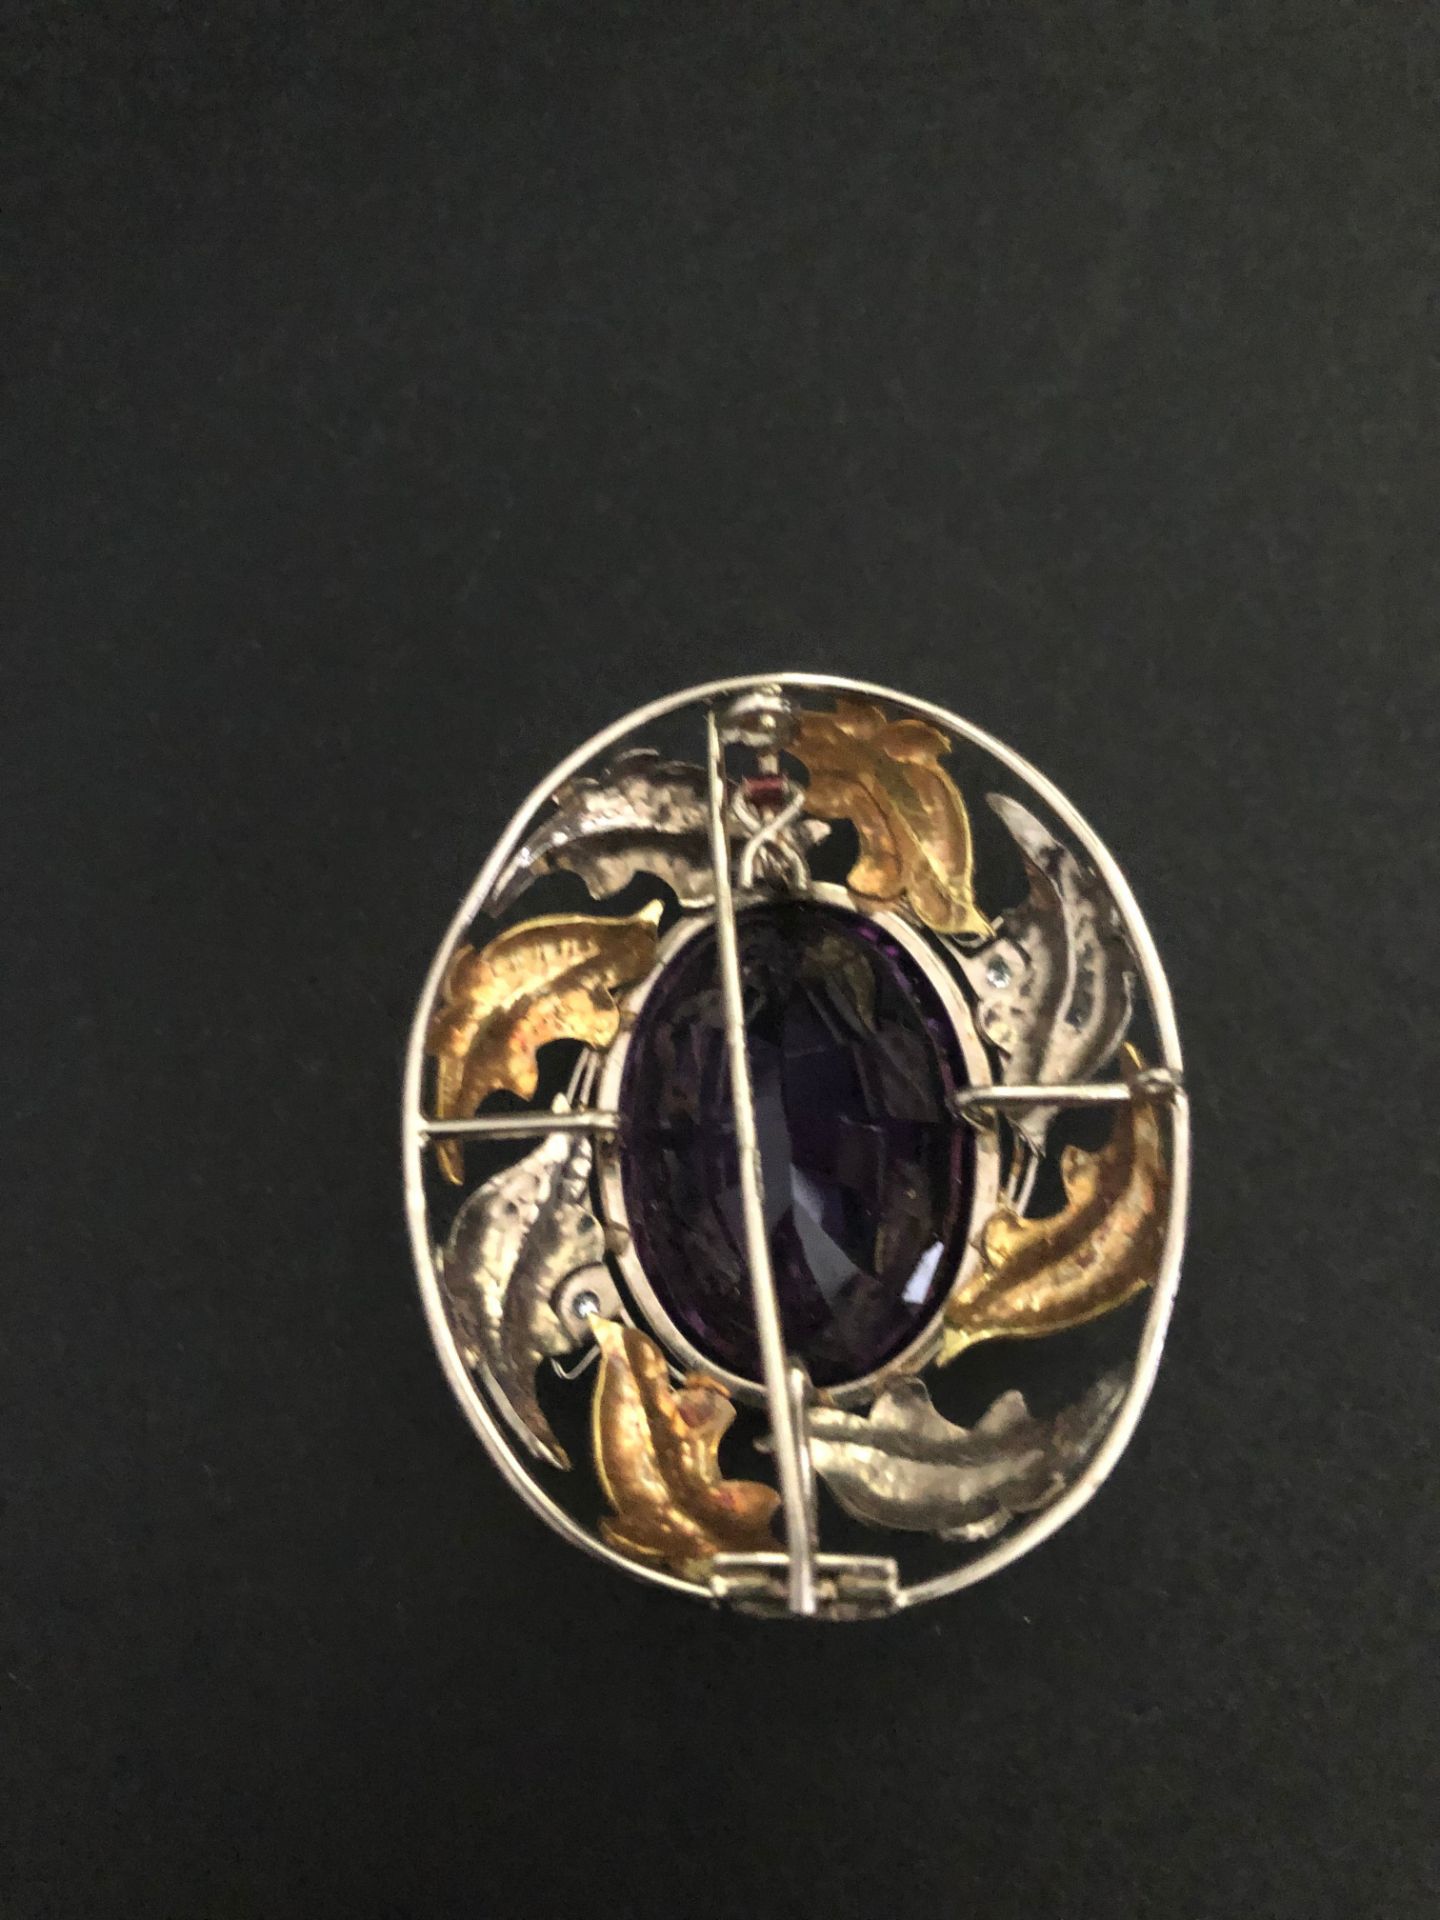 9 Carat Yellow & White Gold Brooch - Image 2 of 2